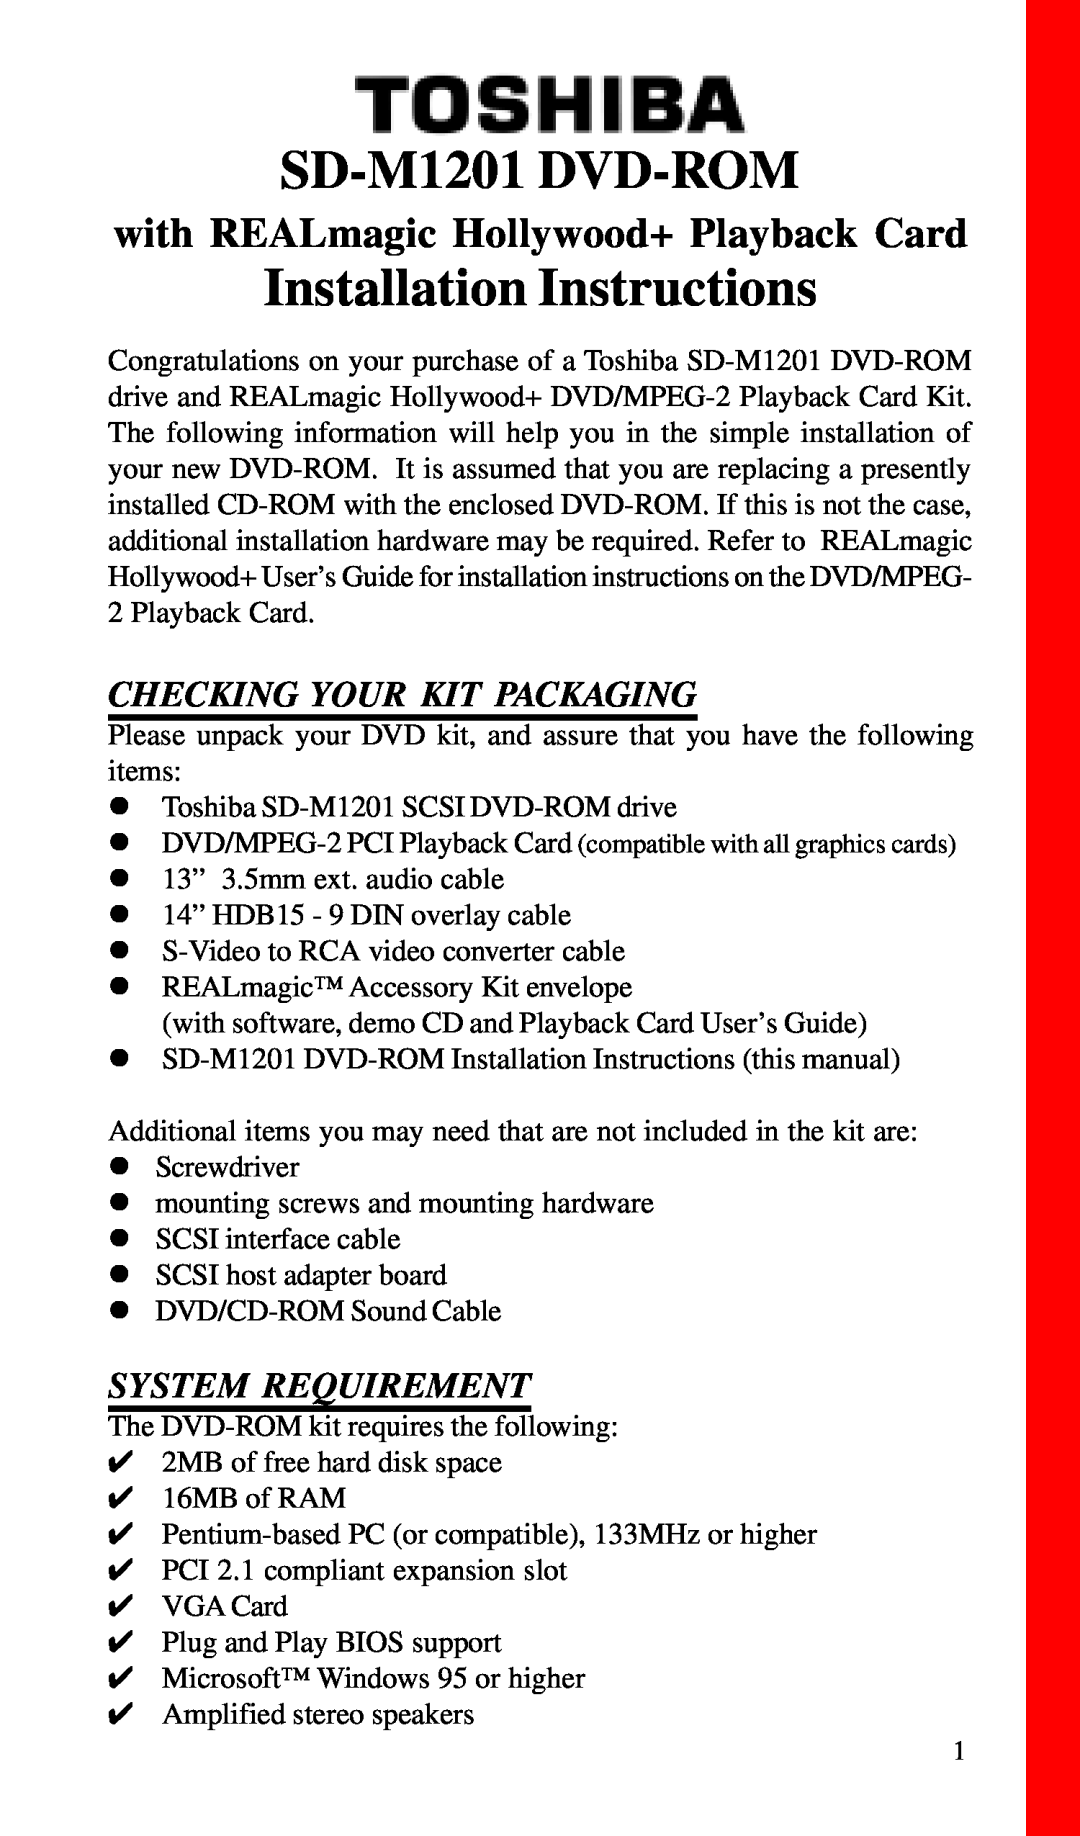 Toshiba installation instructions Checking Your Kit Packaging, System Requirement, SD-M1201 DVD-ROM 